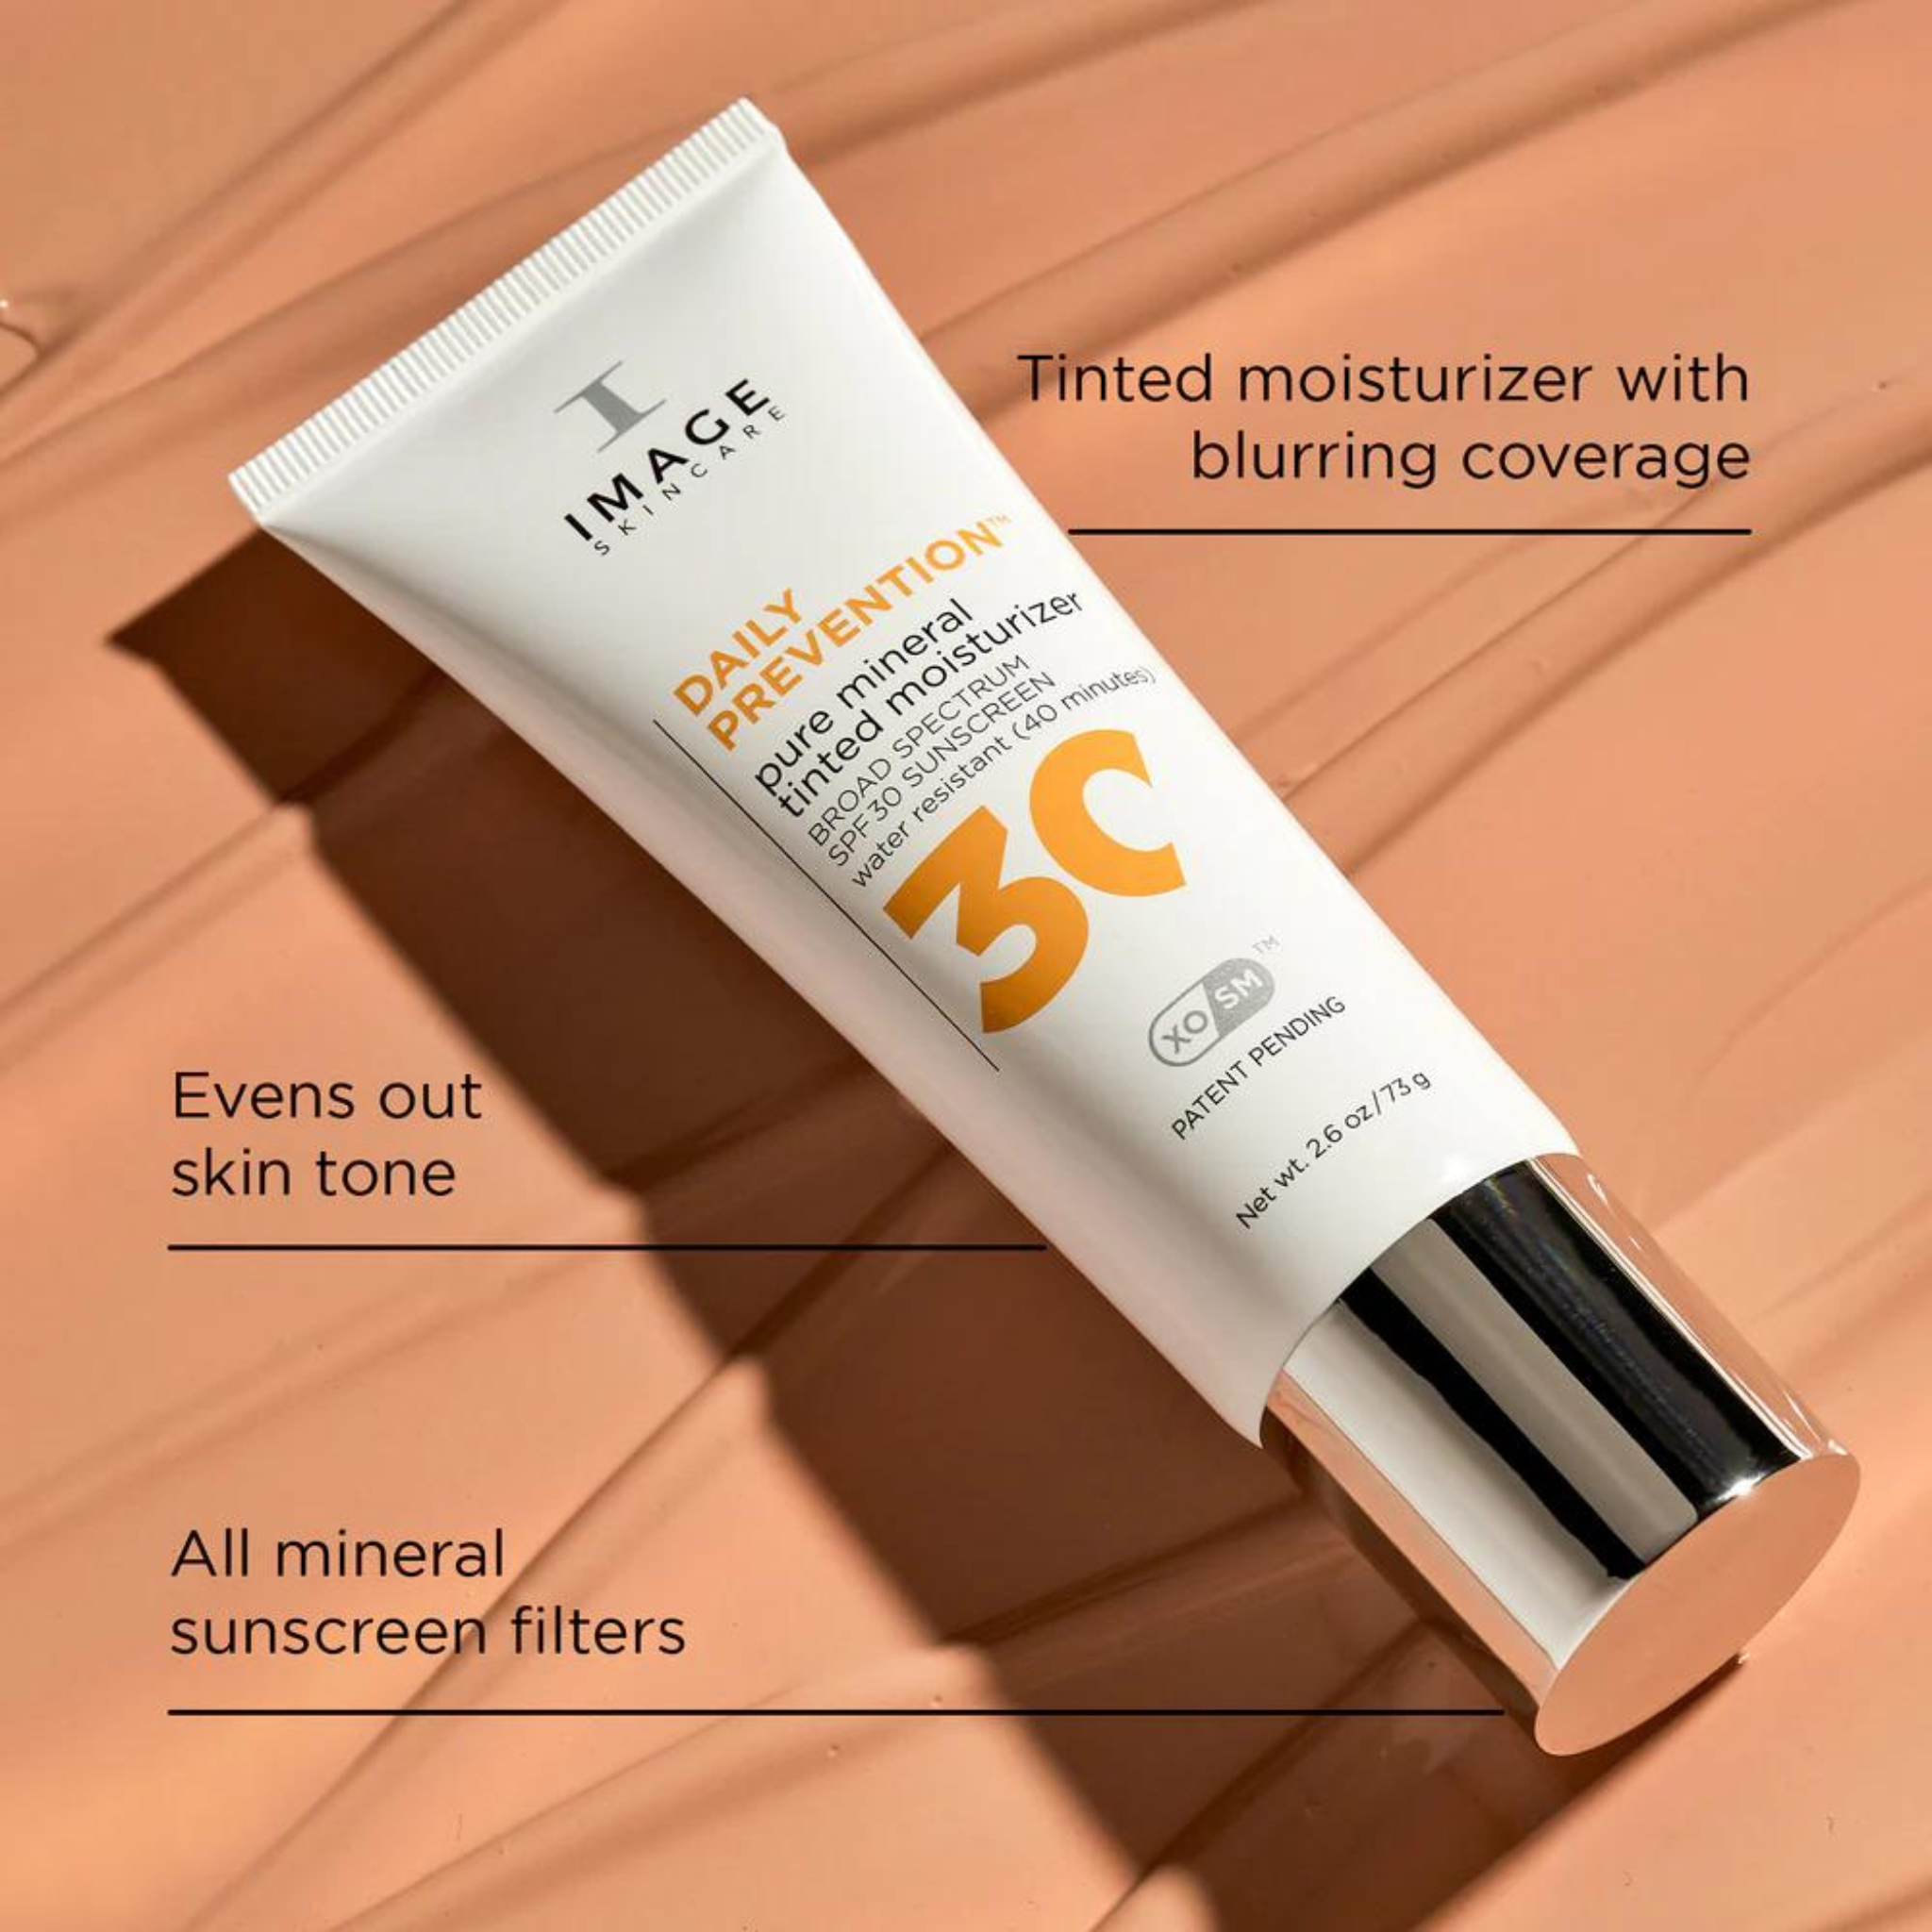 DAILY PREVENTION Pure Mineral Tinted Moisturiser SPF 30